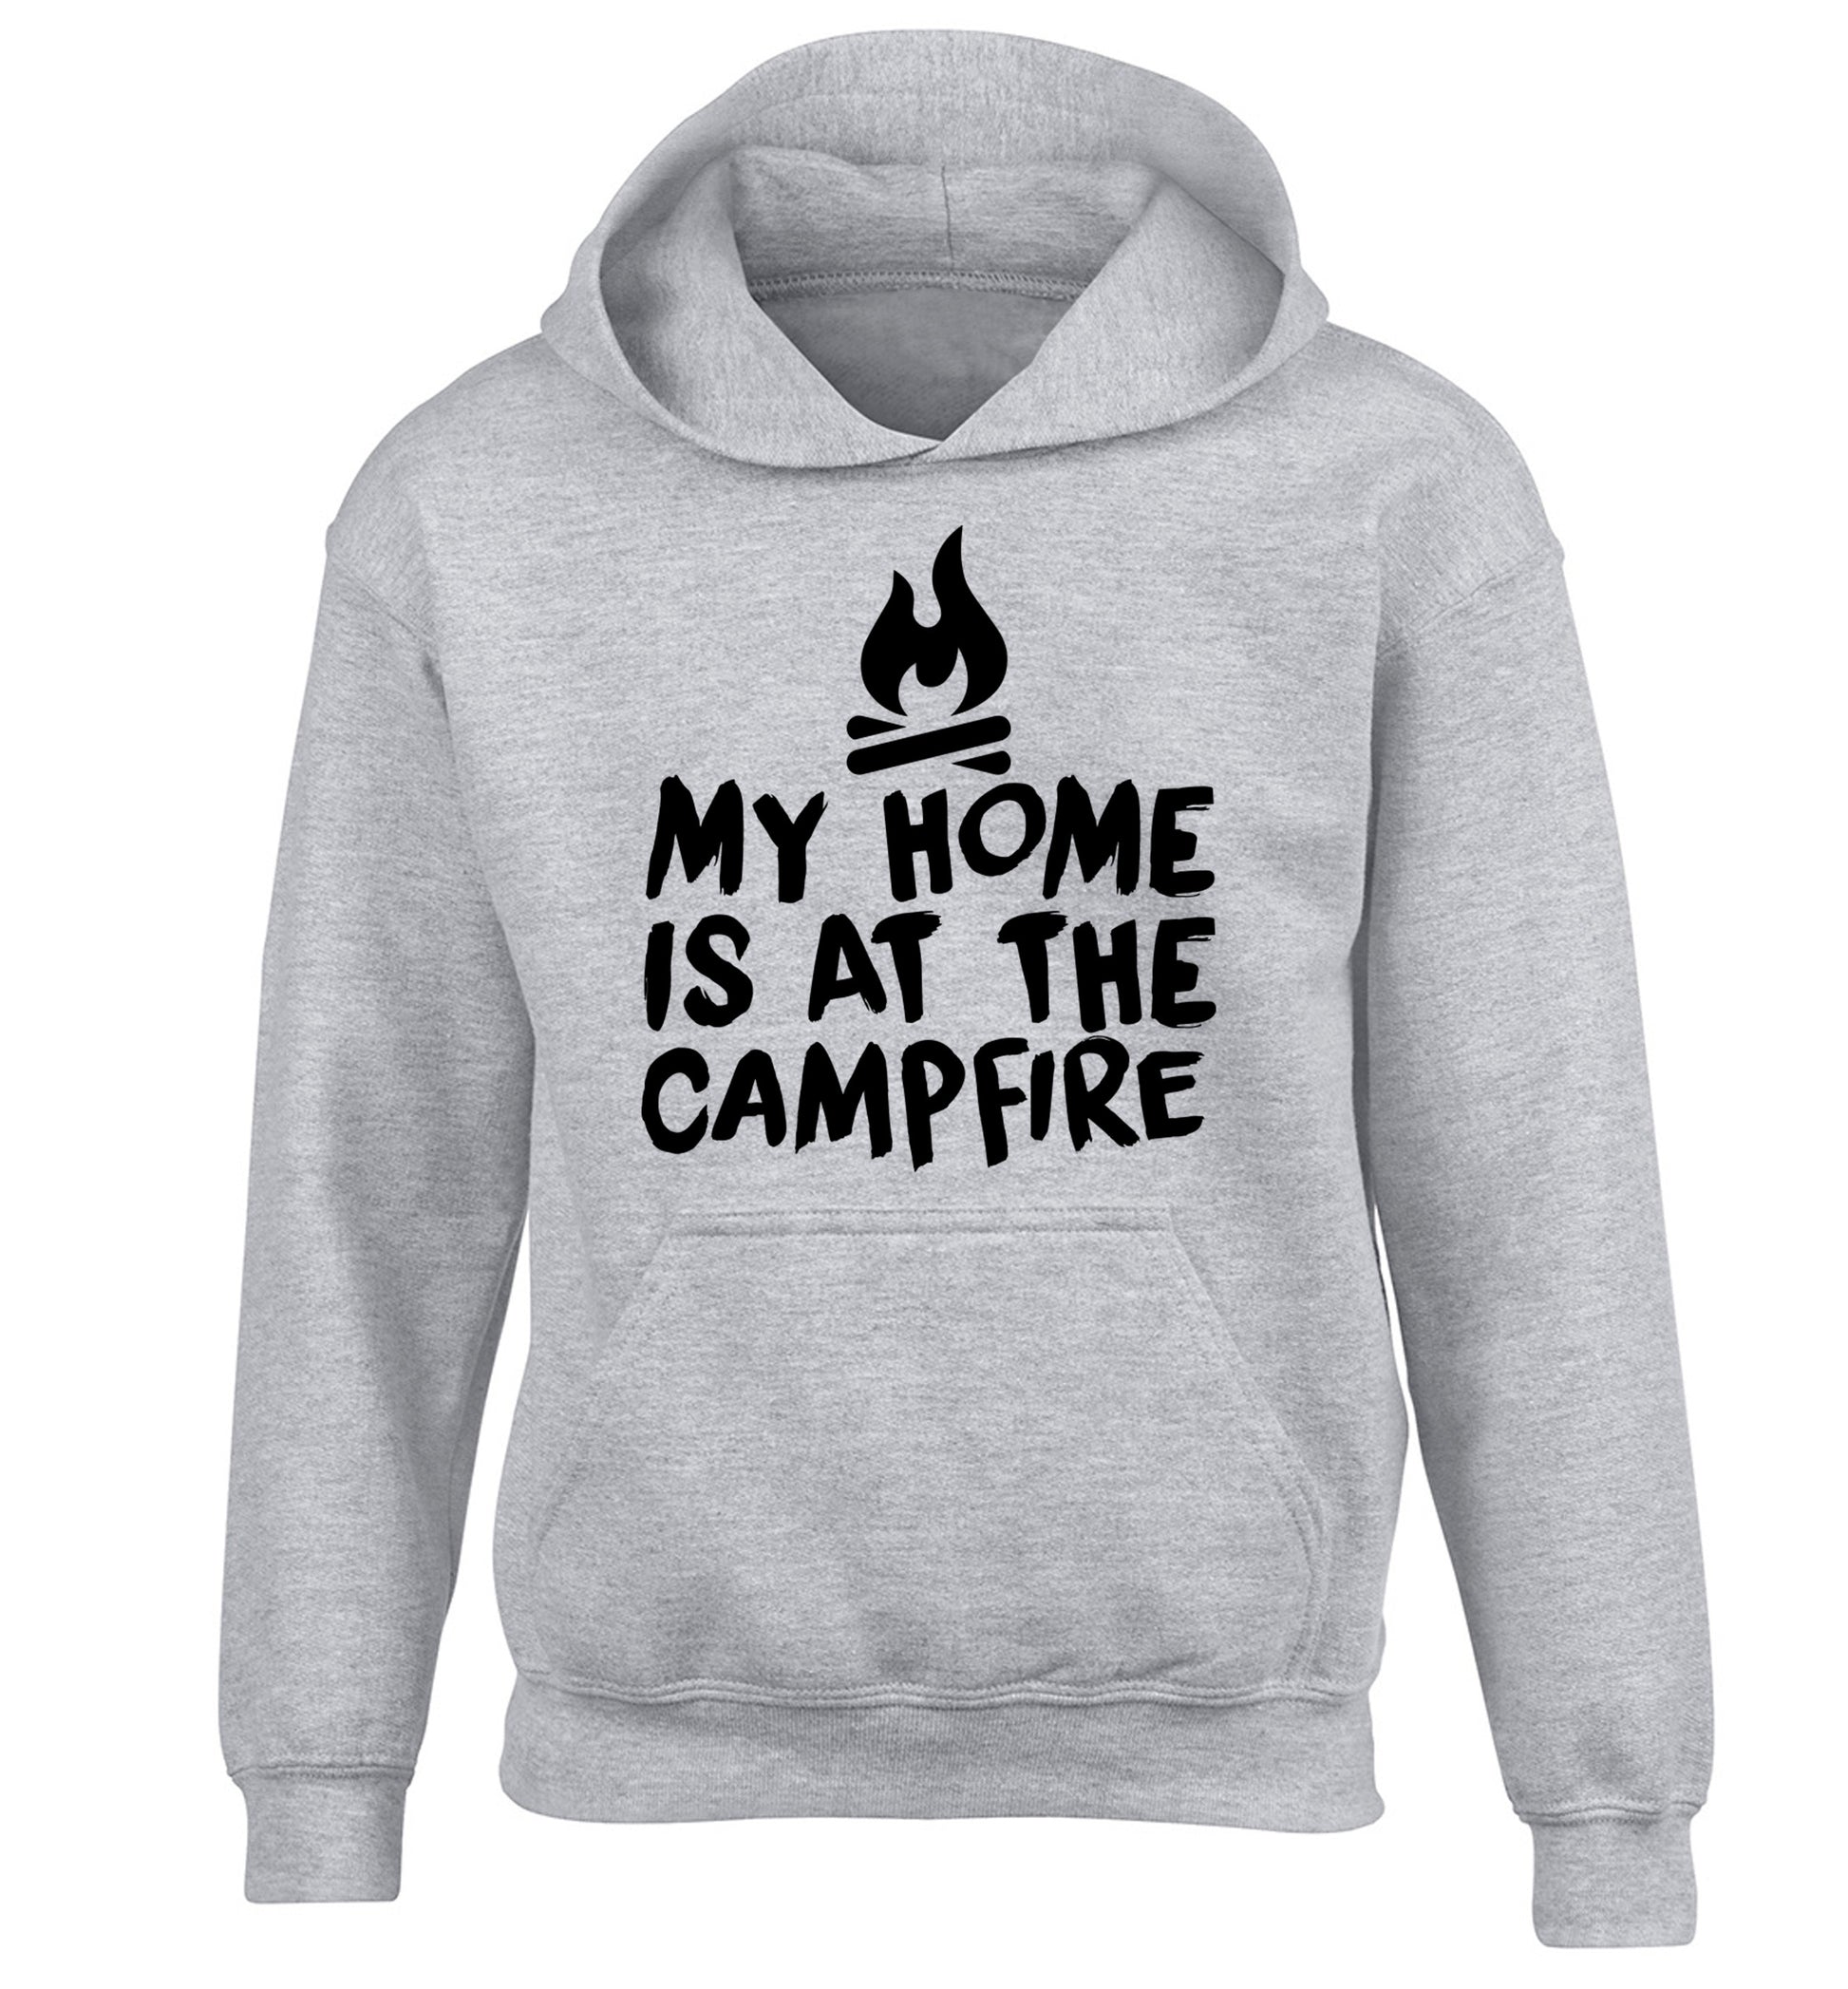 My home is at the campfire children's grey hoodie 12-14 Years